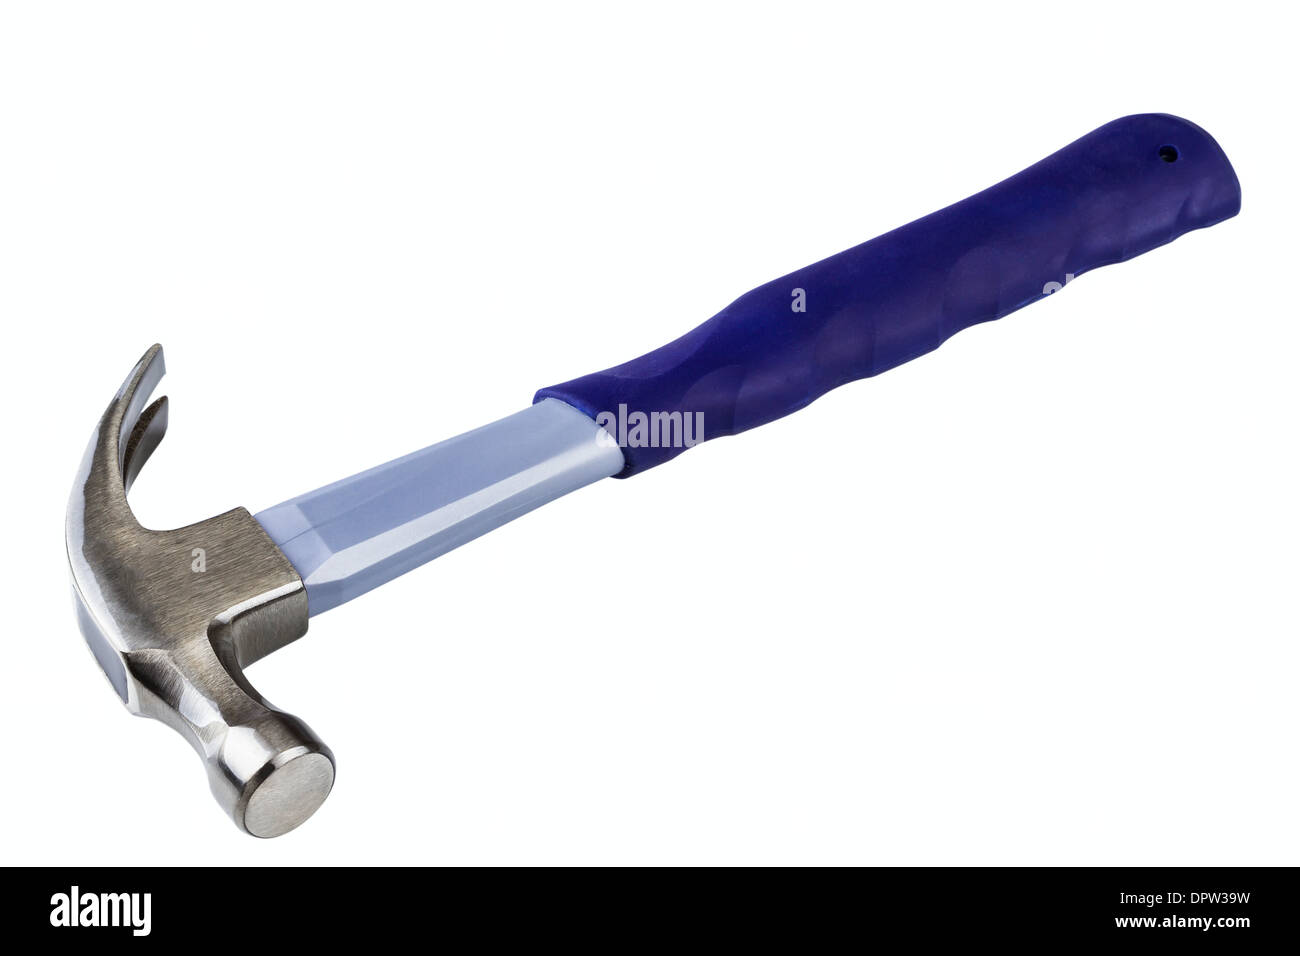 curve claw fiberglass hammer isolated on white background Stock Photo